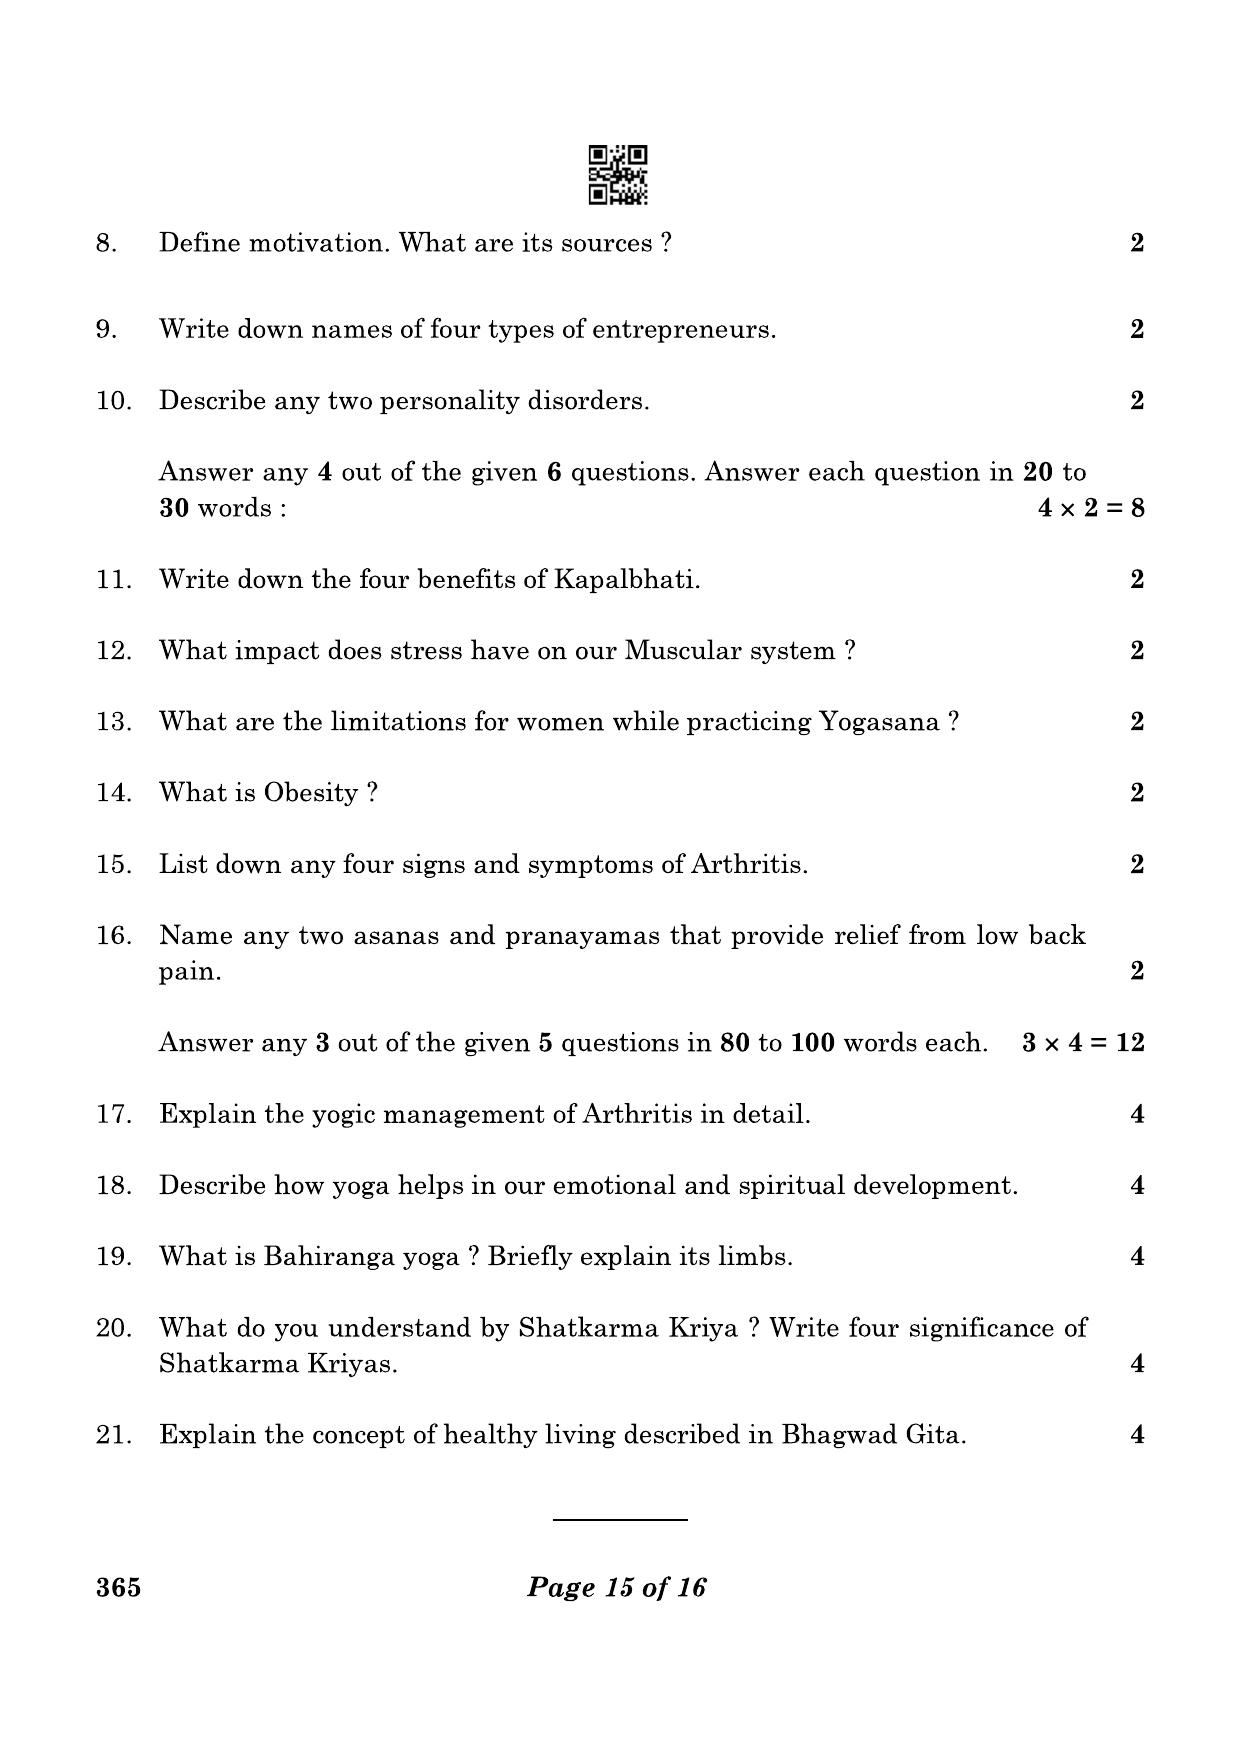 CBSE Class 12 365_Yoga 2023 Question Paper - Page 15